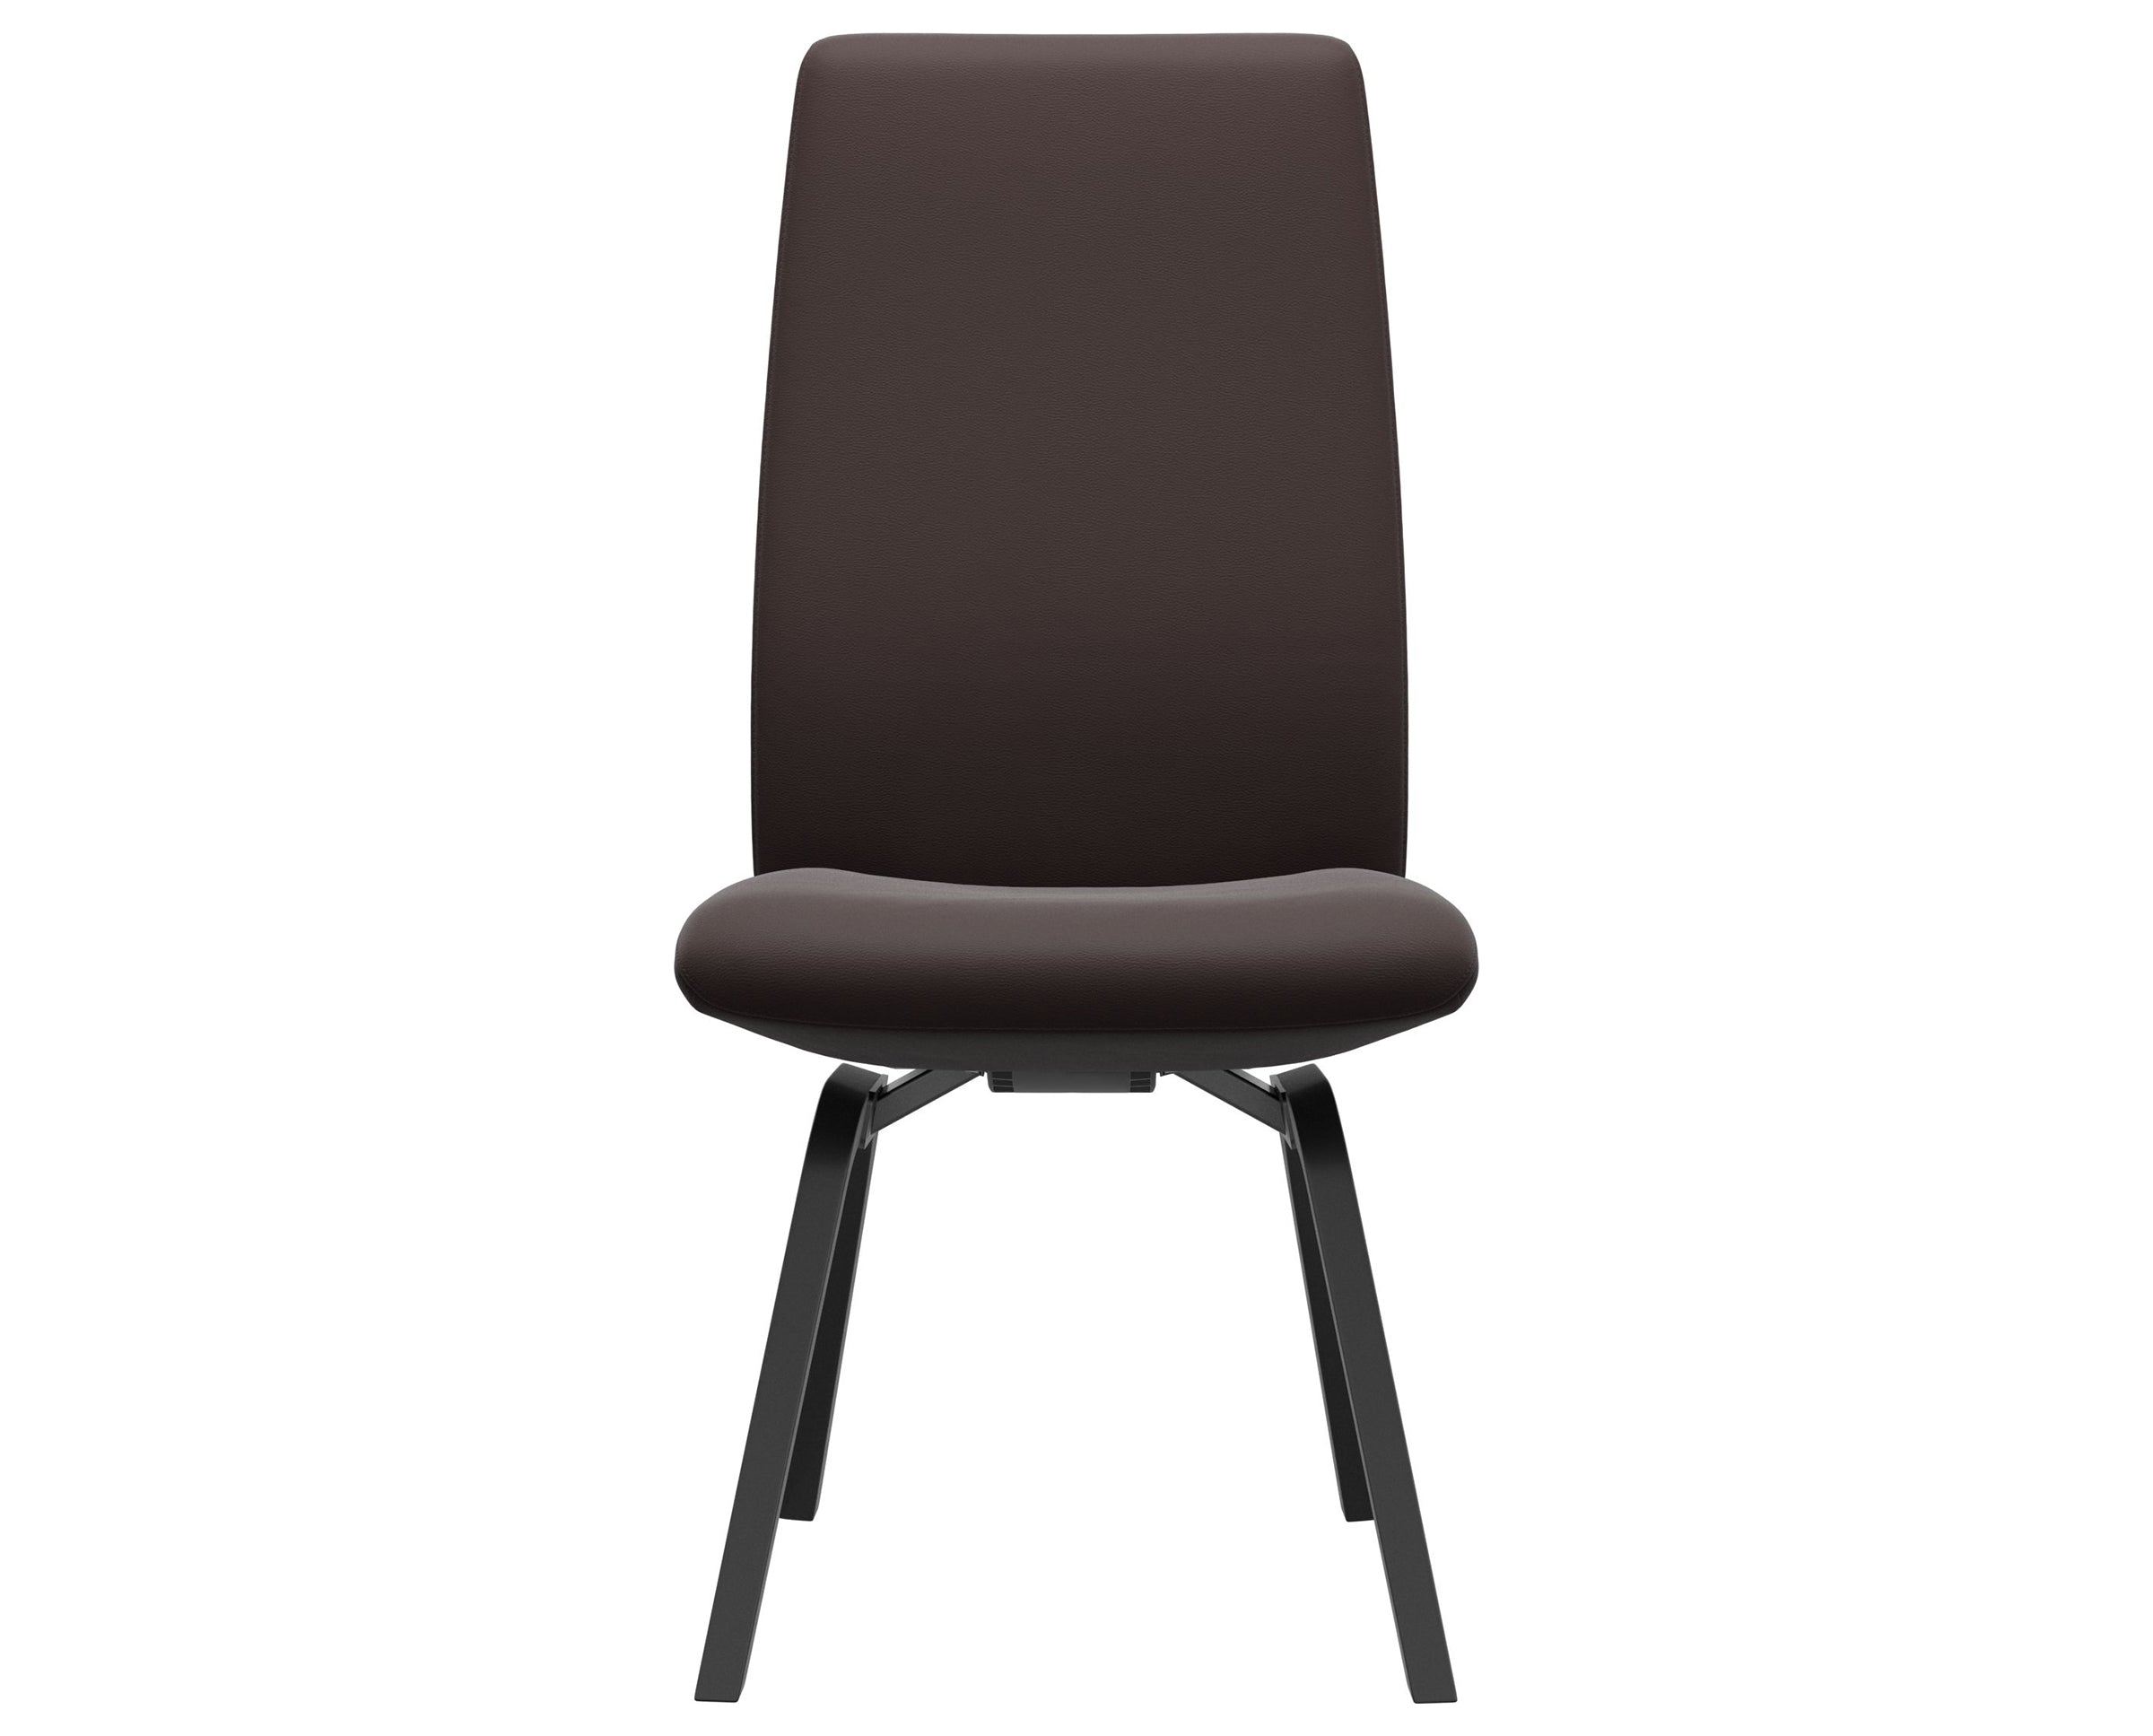 Paloma Leather Chocolate and Black Base | Stressless Laurel High Back D200 Dining Chair | Valley Ridge Furniture